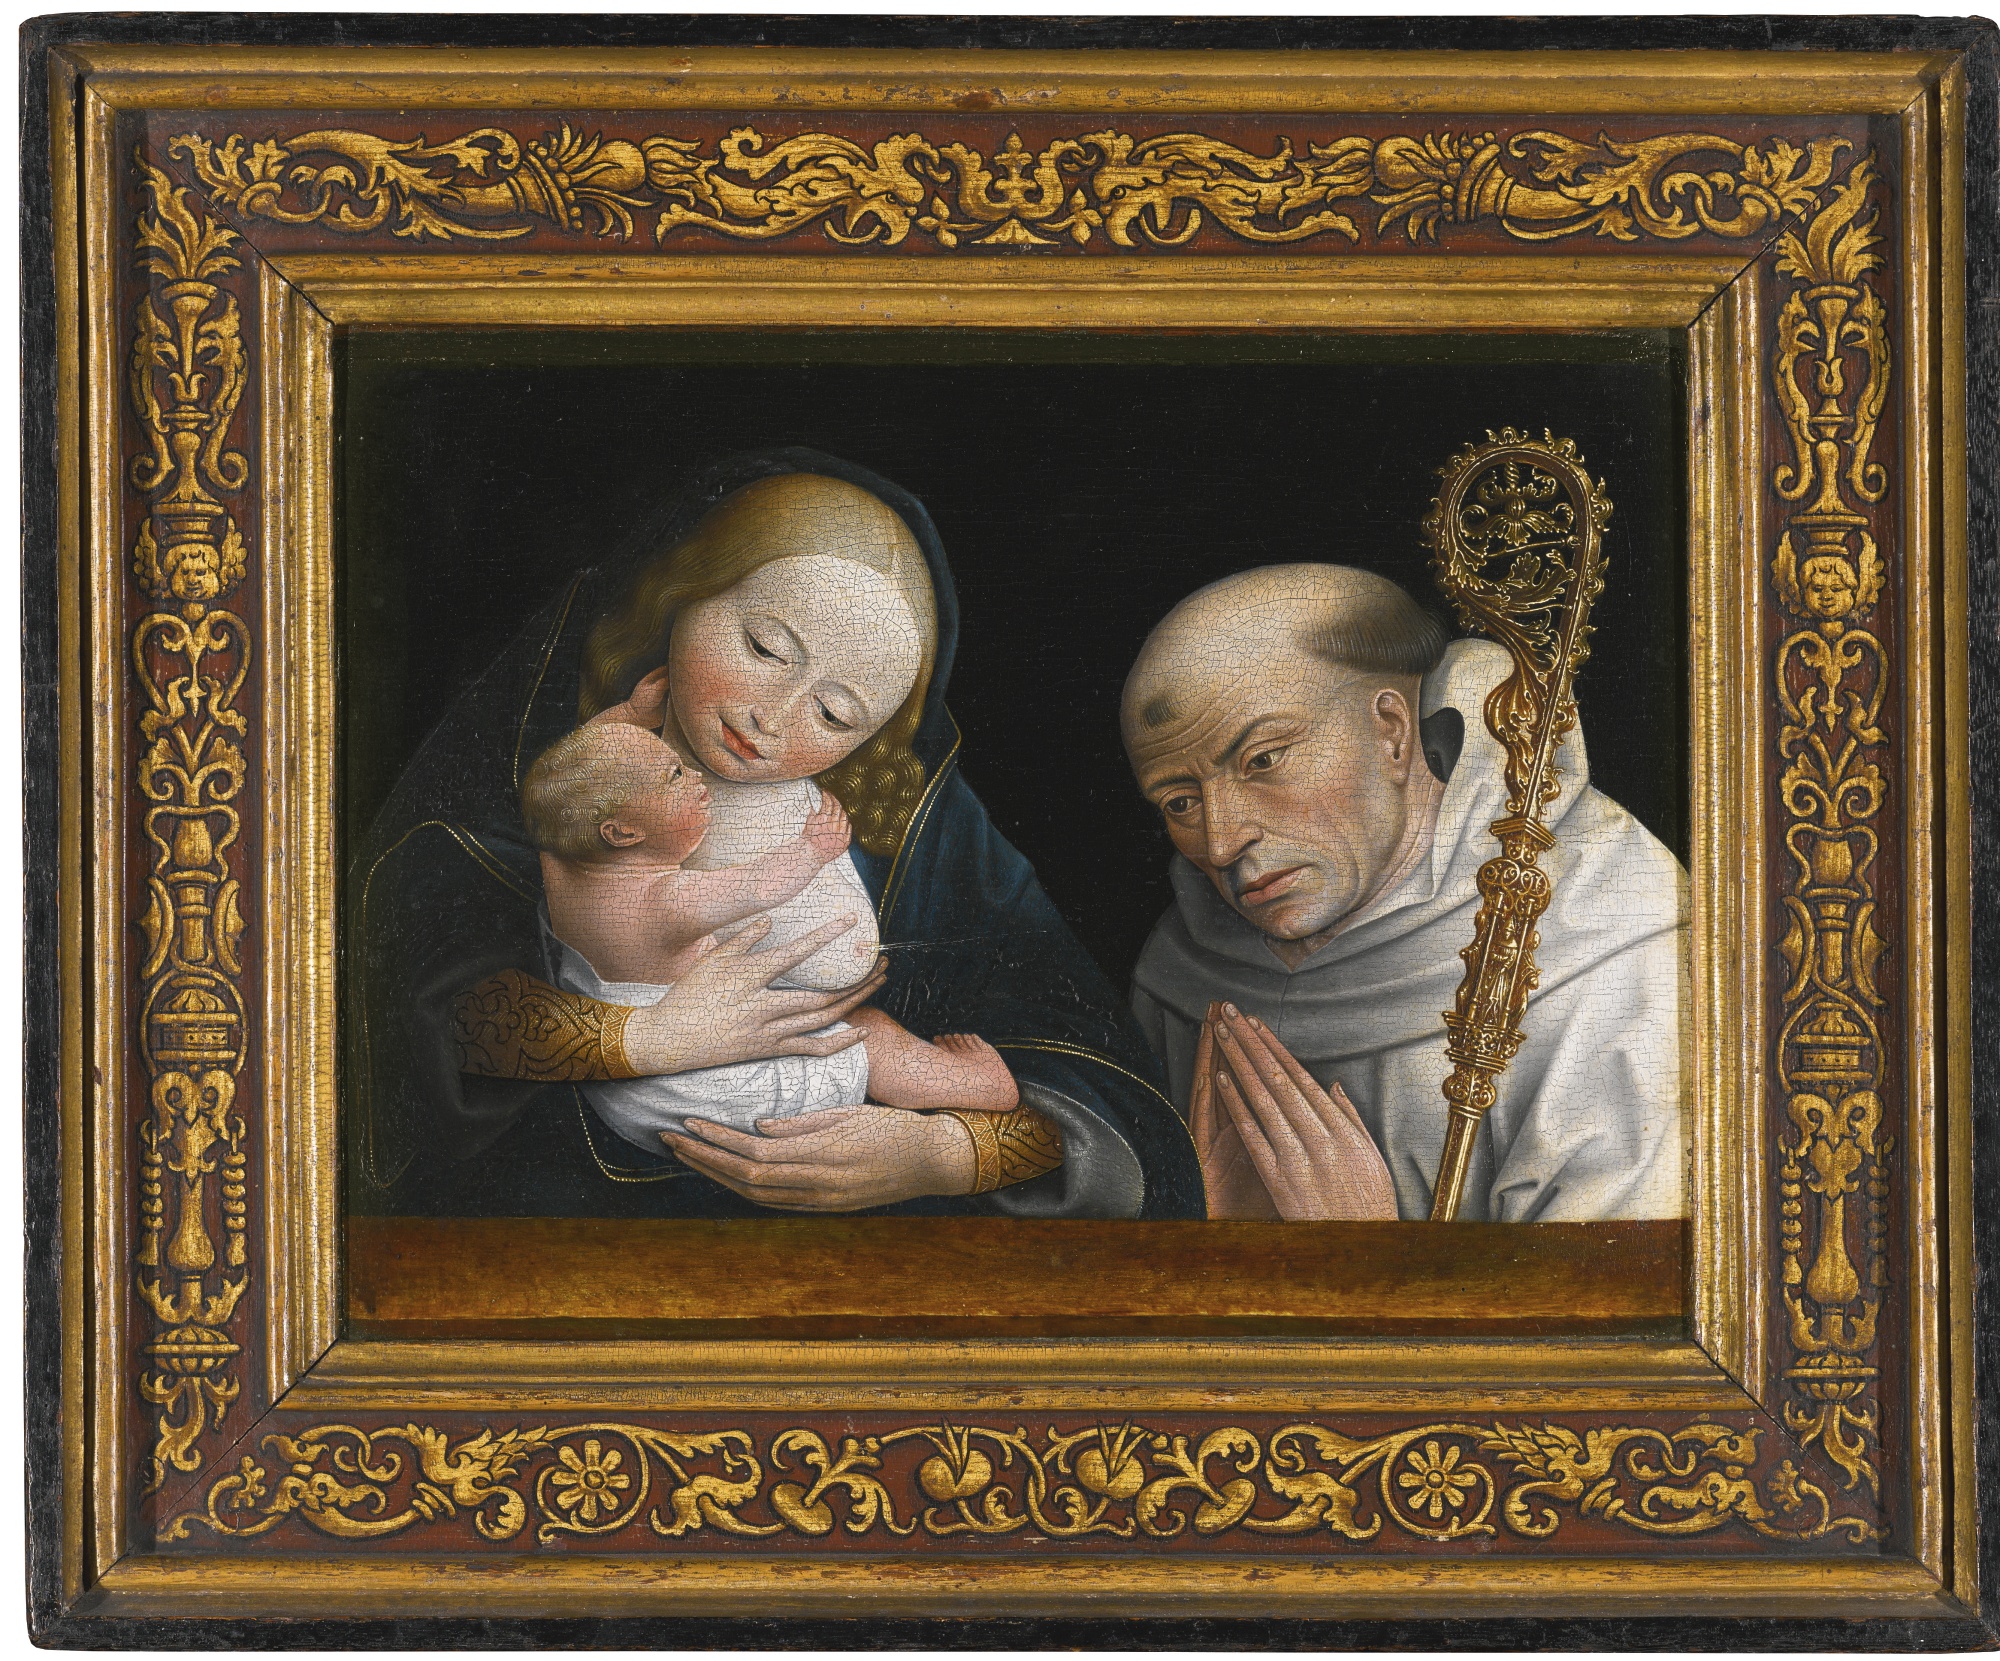 Follower of Master of Magdalene Legend - Virgin and Child with Saint Bernard of Clairvaux